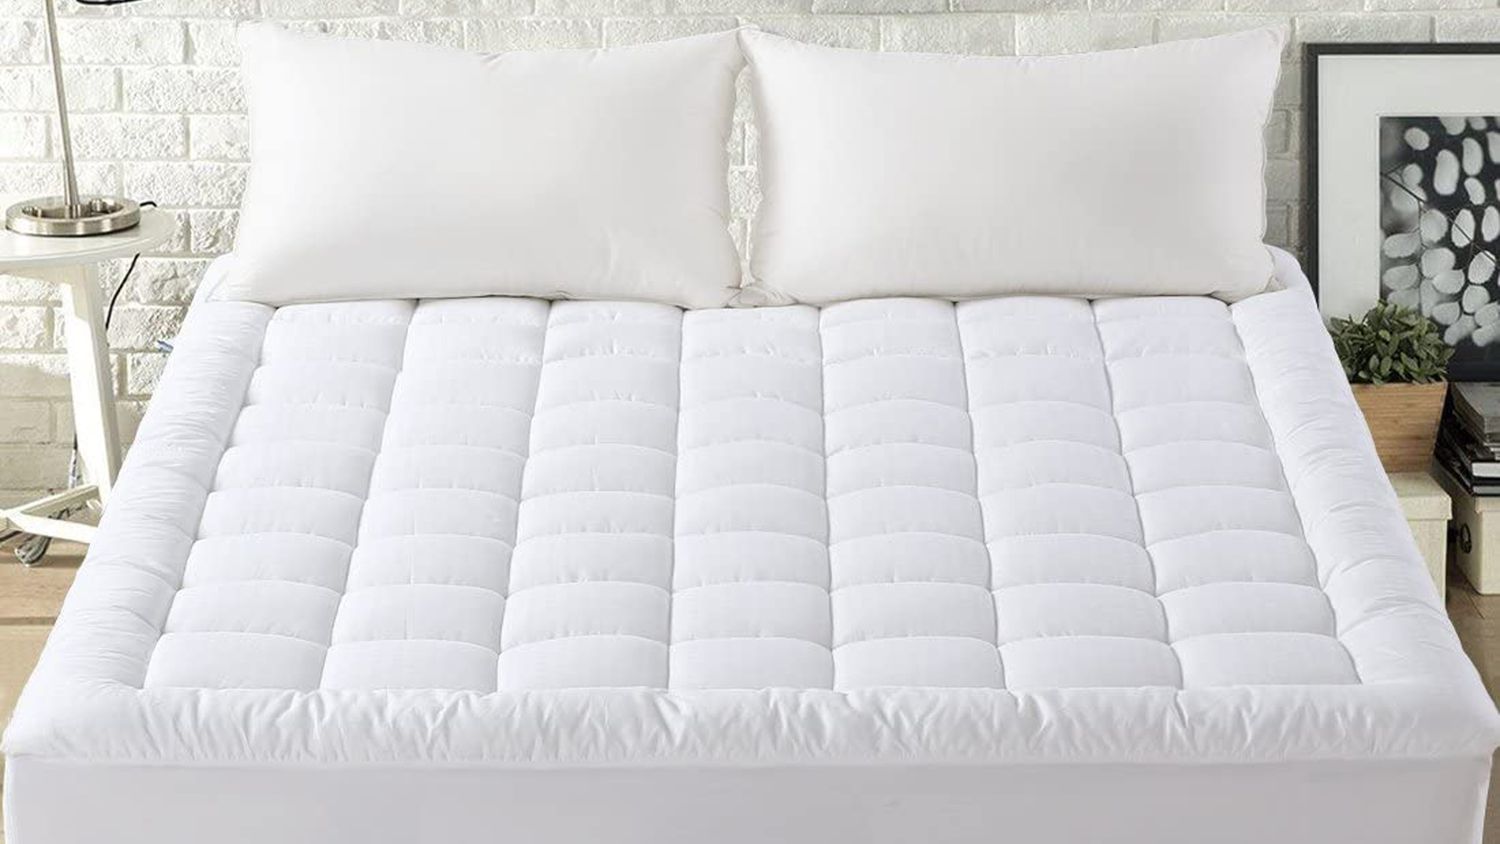 Oaskys Mattress Pad Cover Cotton Top With Stretches to 18'' Size Queen White for sale online 